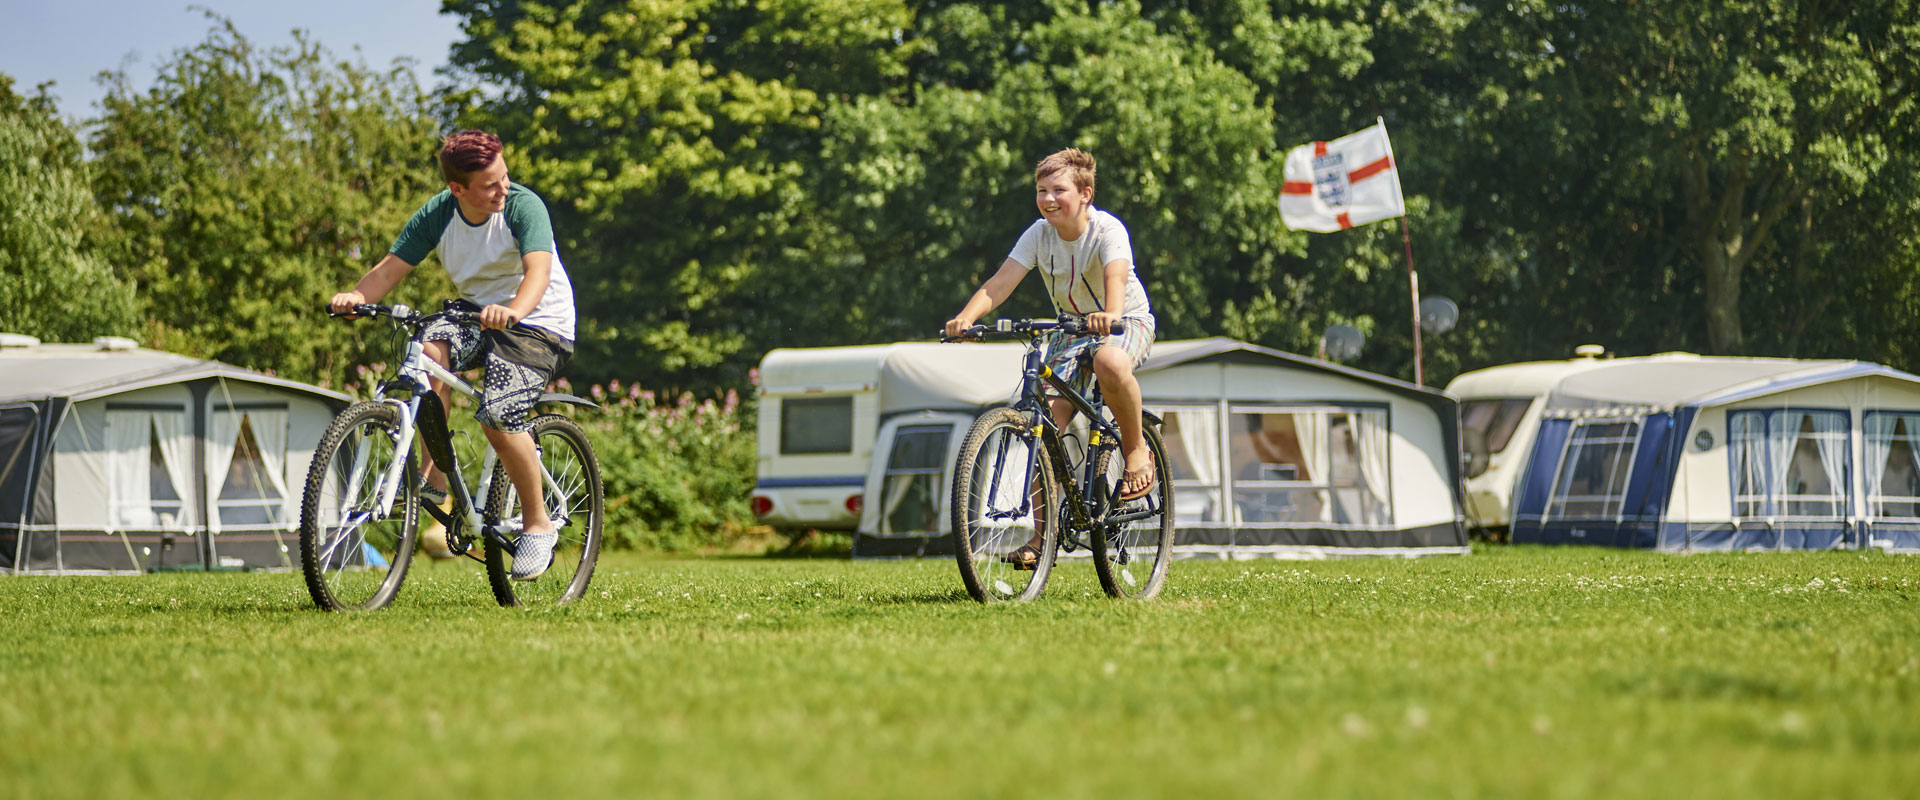 Image of a familcy on holiday at park farm campsite